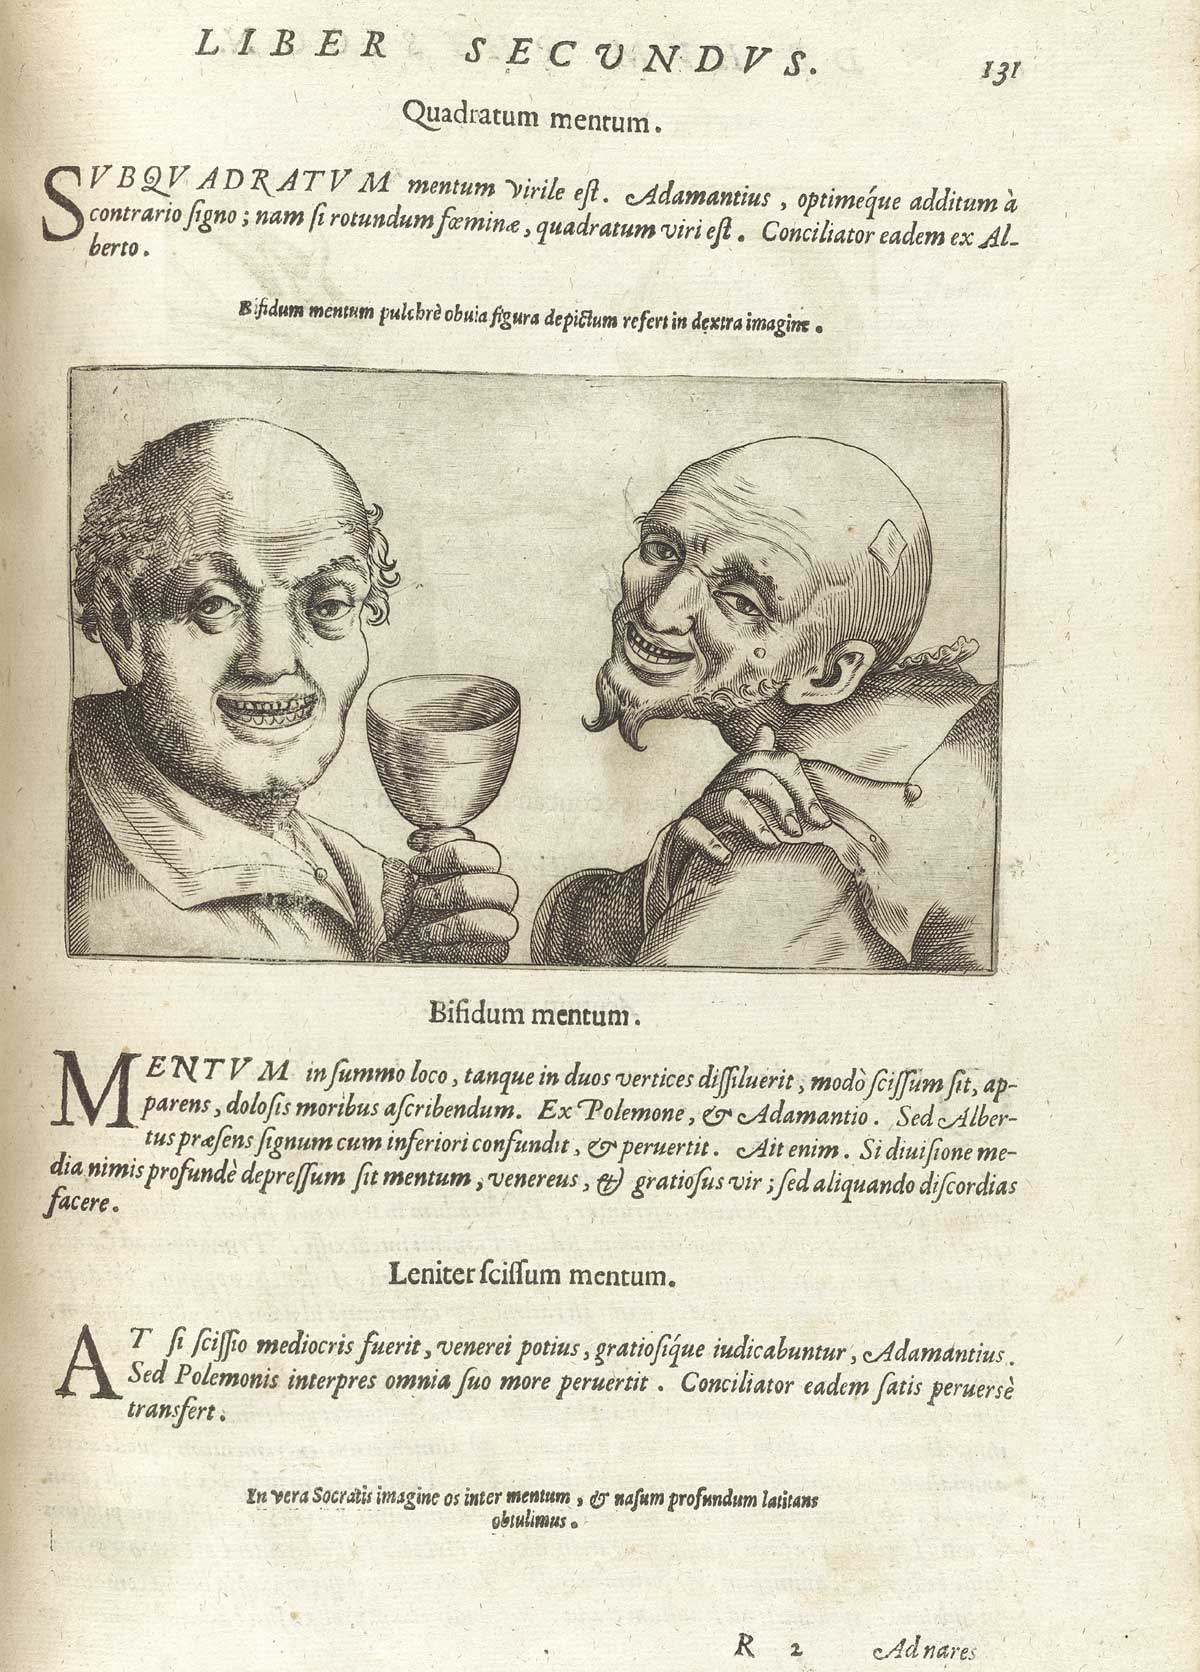 Page 131 of Giambattista della Porta's De humana physiognomonia libri IIII, featuring the head and shoulders frontal view of two smiling men. The man on the left is holding a cup in his left hand between the two men.